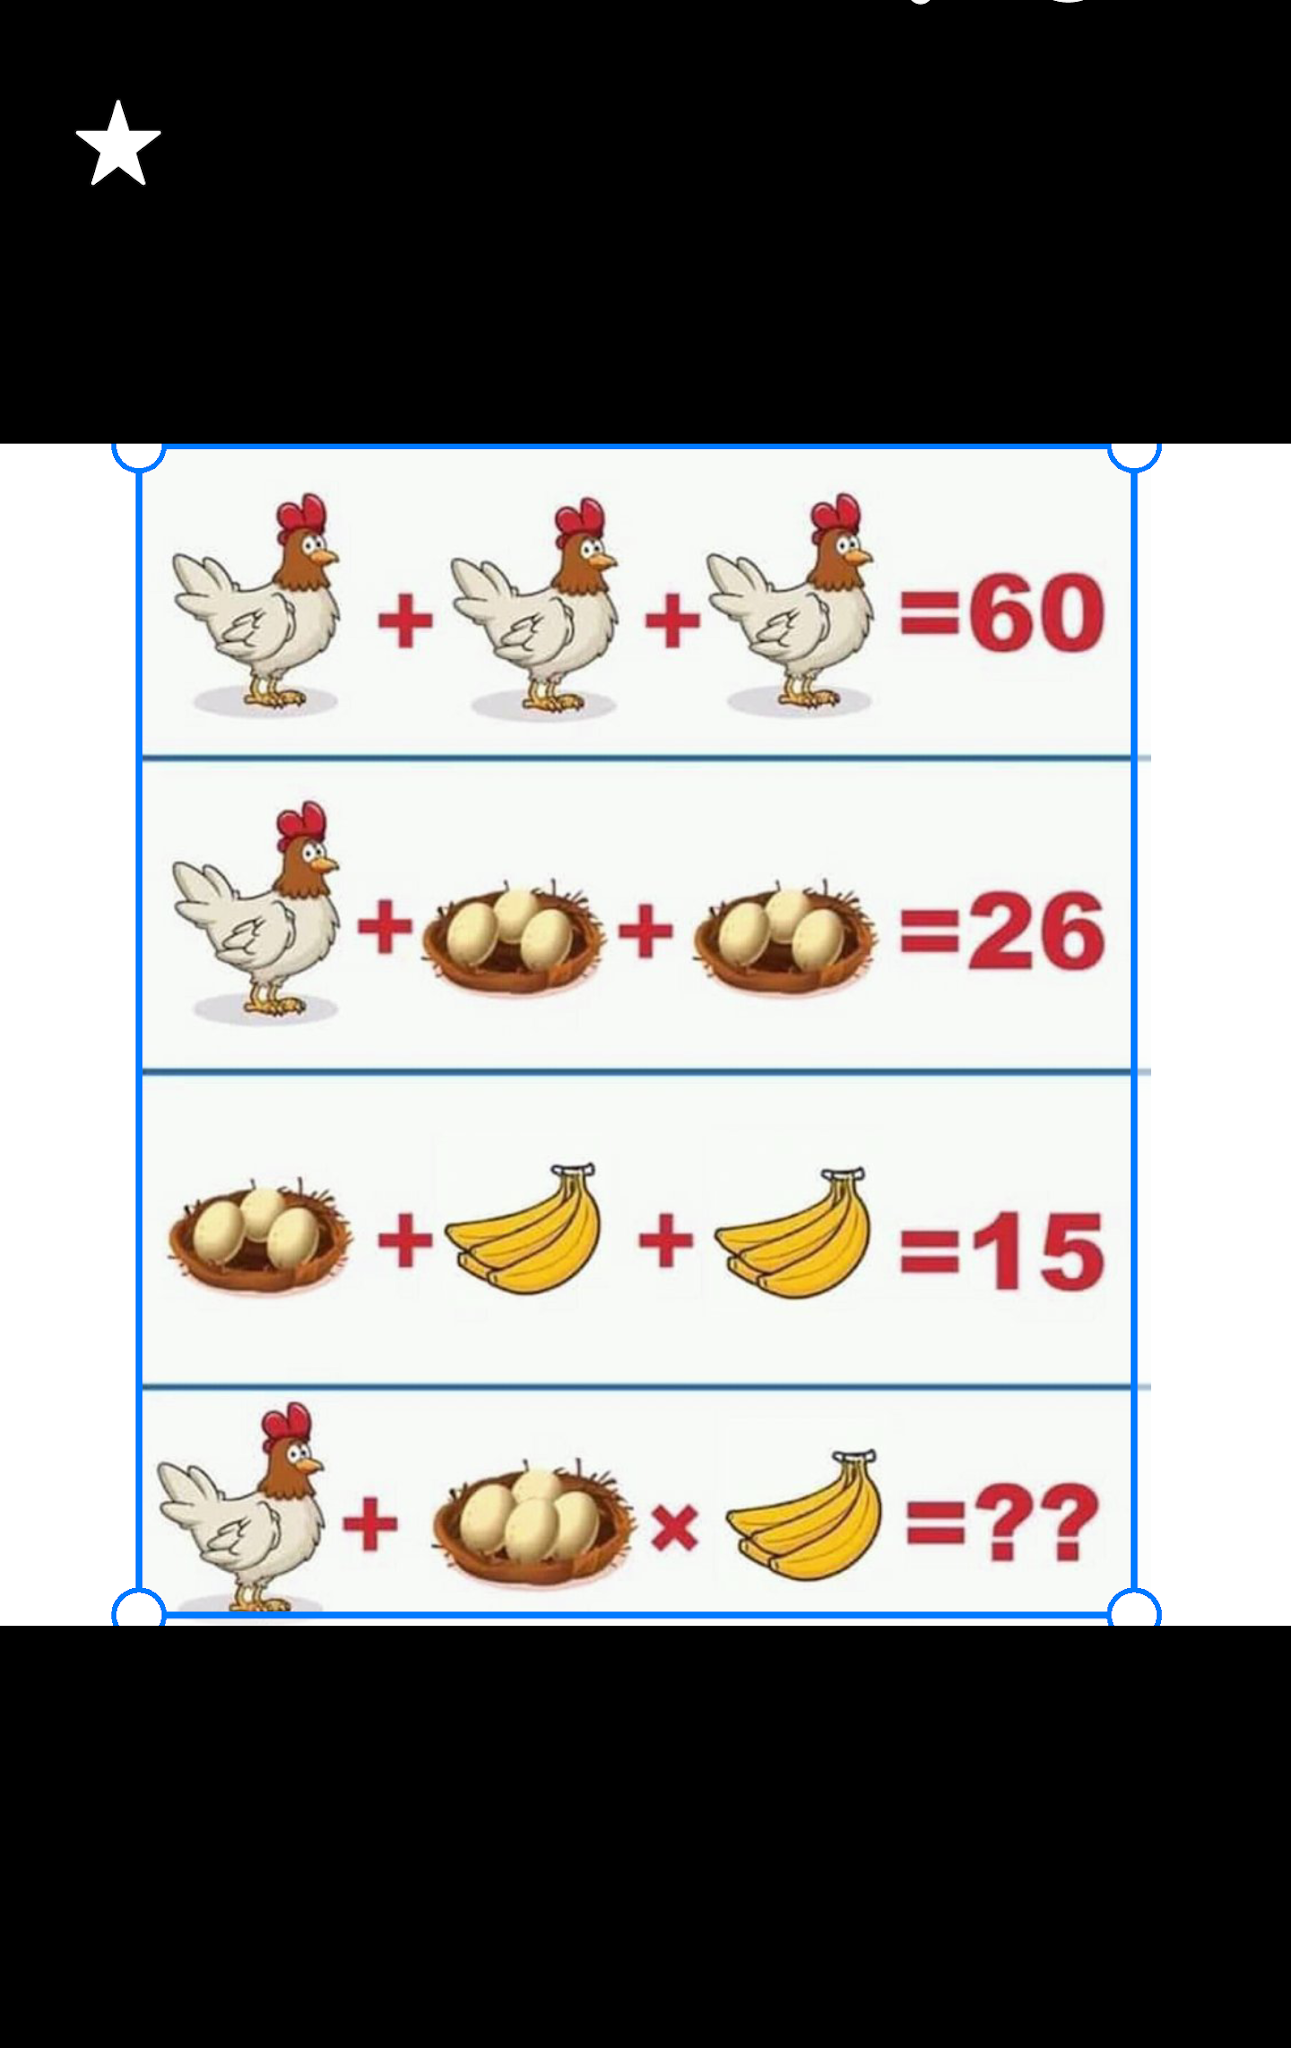 Chicken, egg and banana puzzle answer